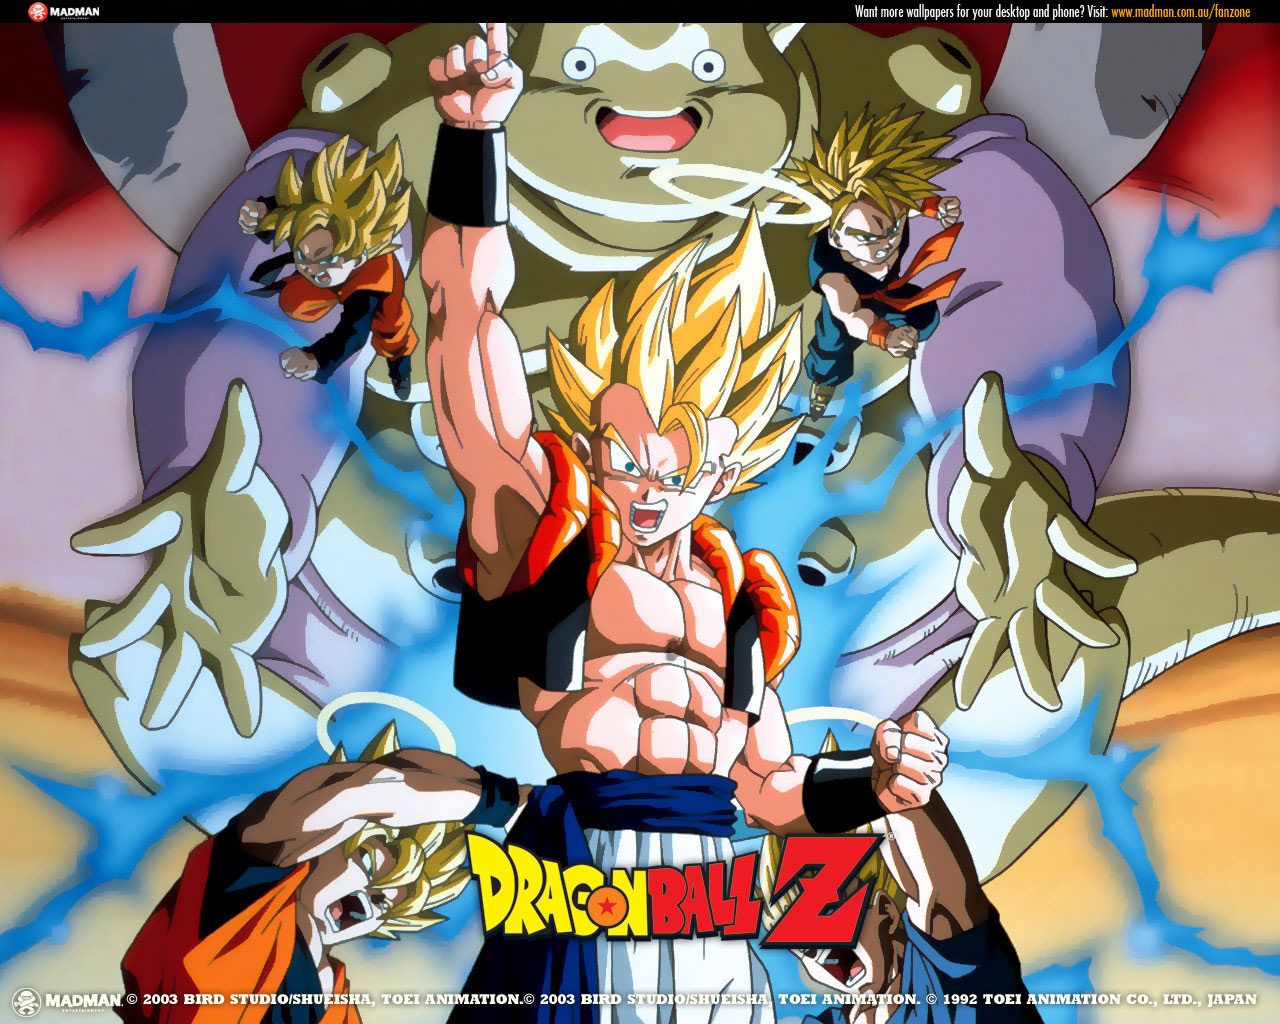 Dragon Ball Z Wallpapers High Definition WallpapersCool Wallpapers 1280x1024